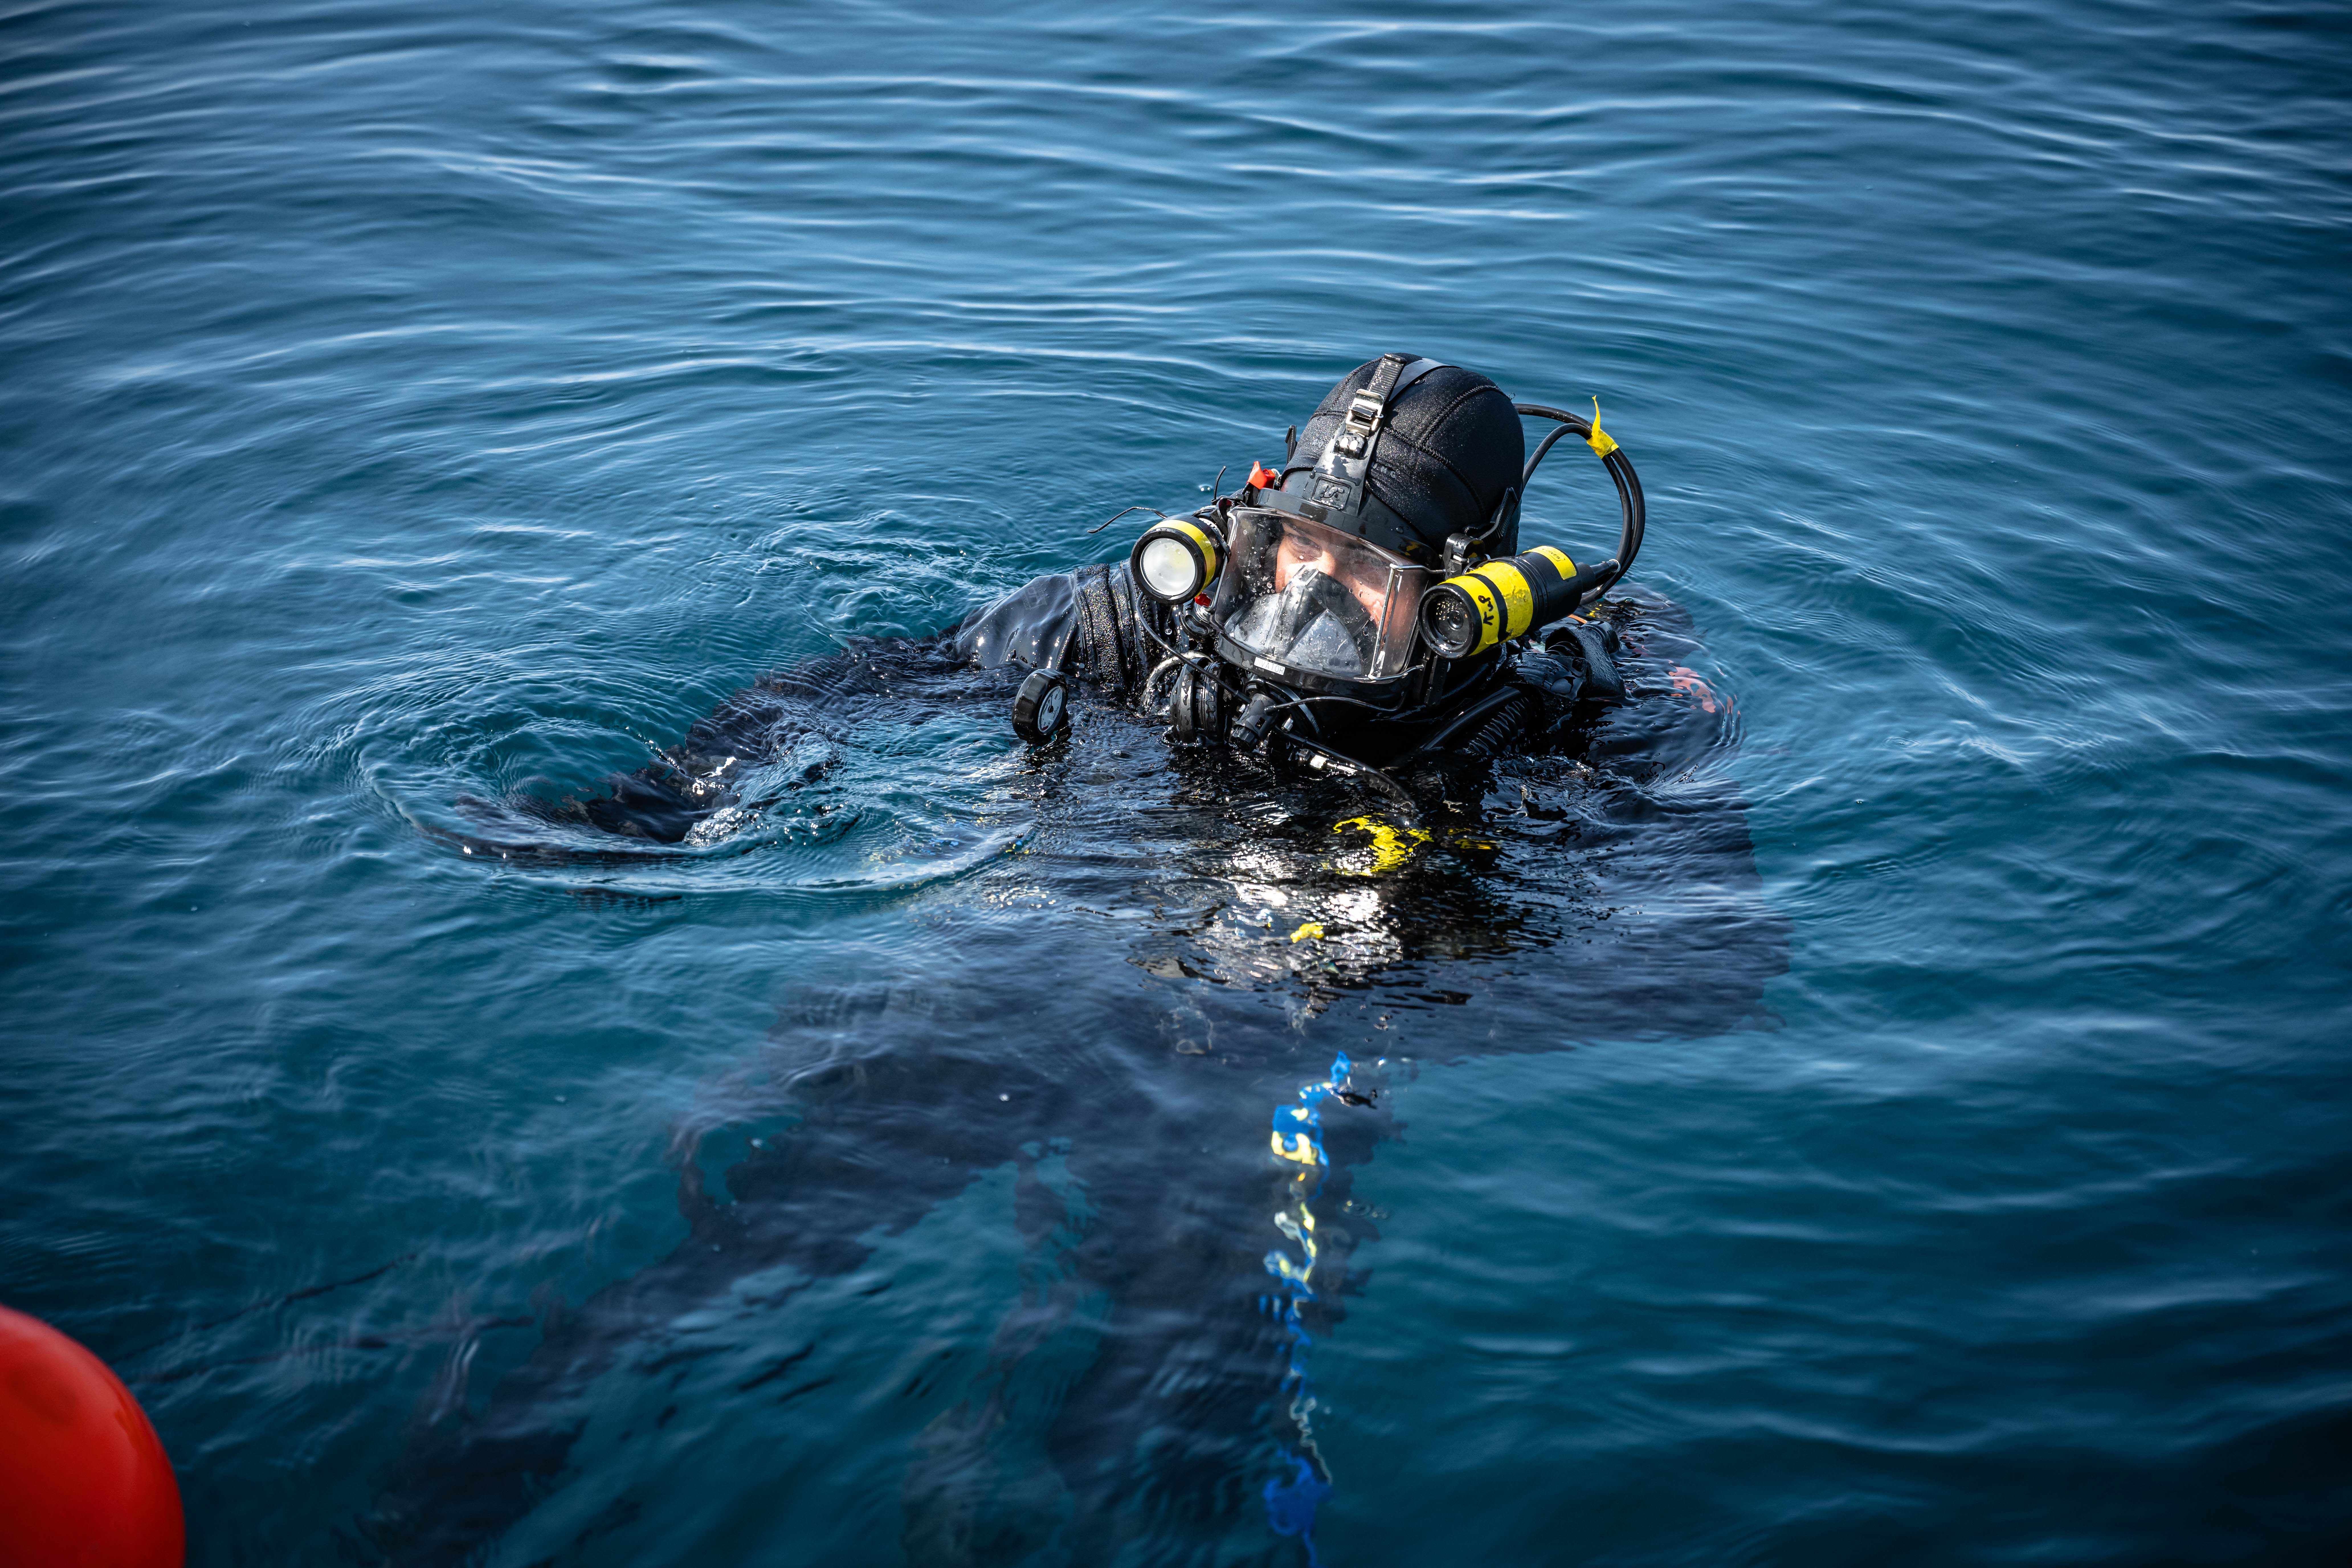 One of the divers tasked to render safe wartime shipwrecks.